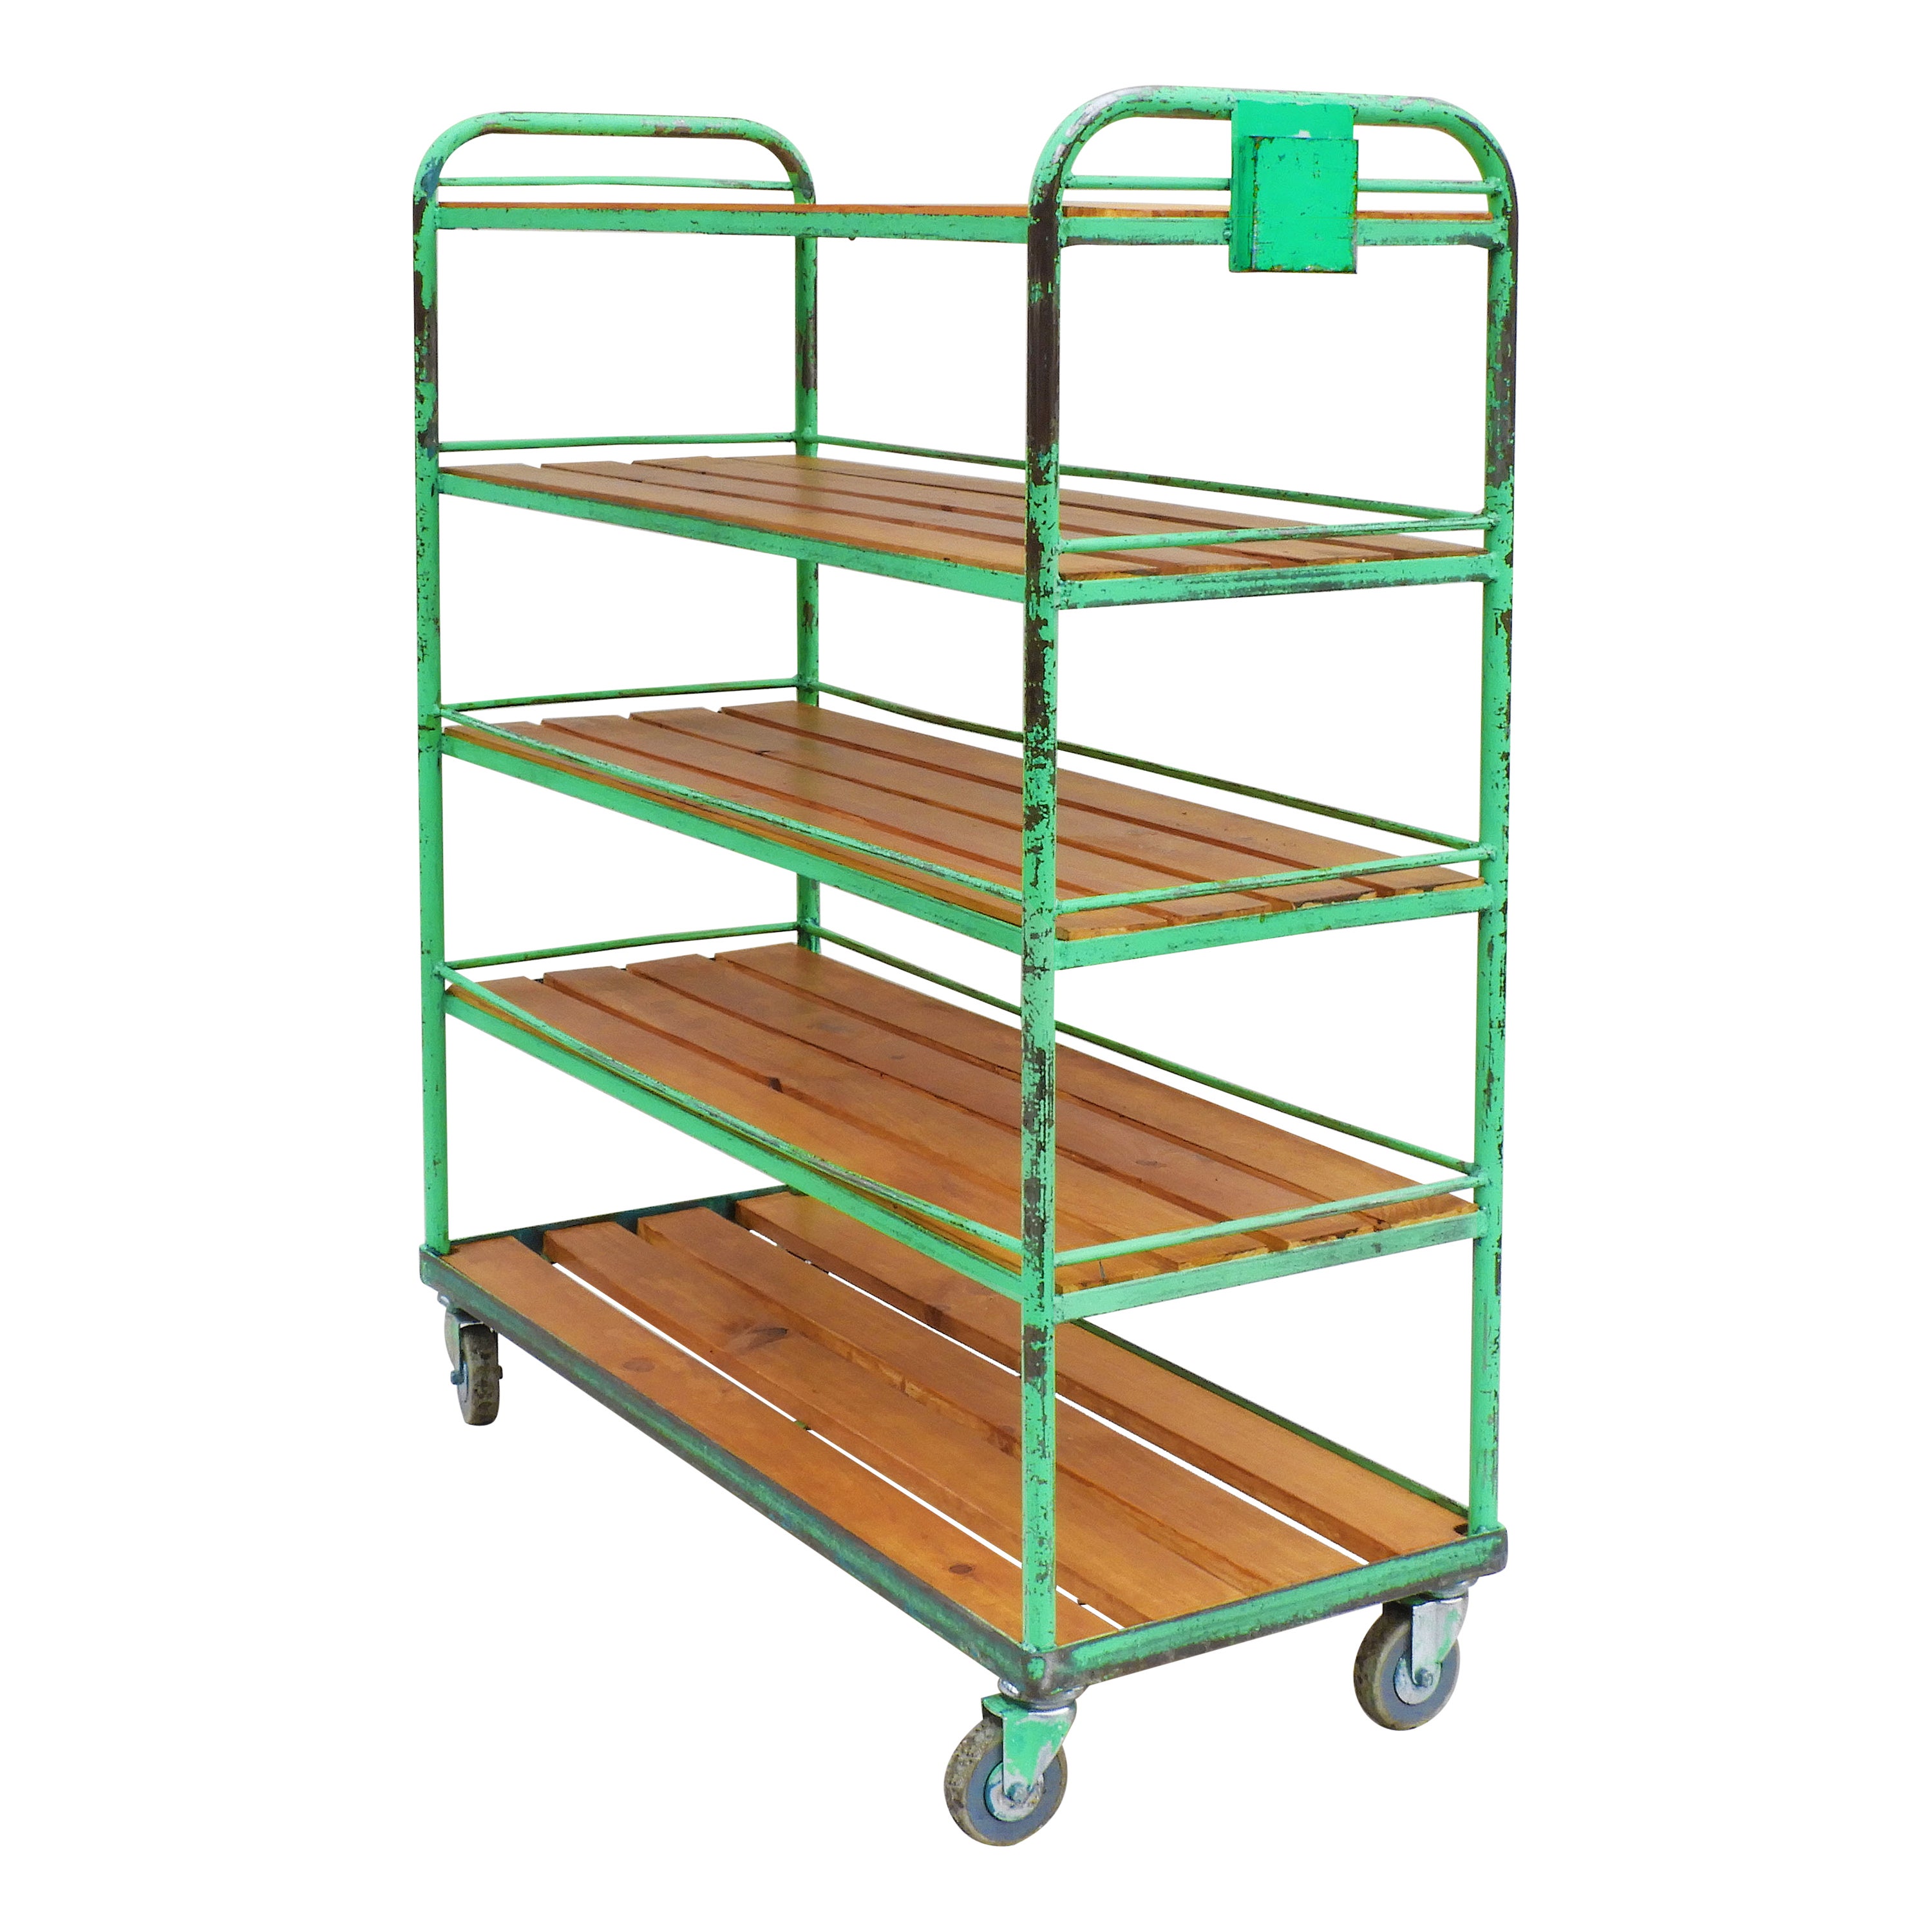 What were factory carts used for?